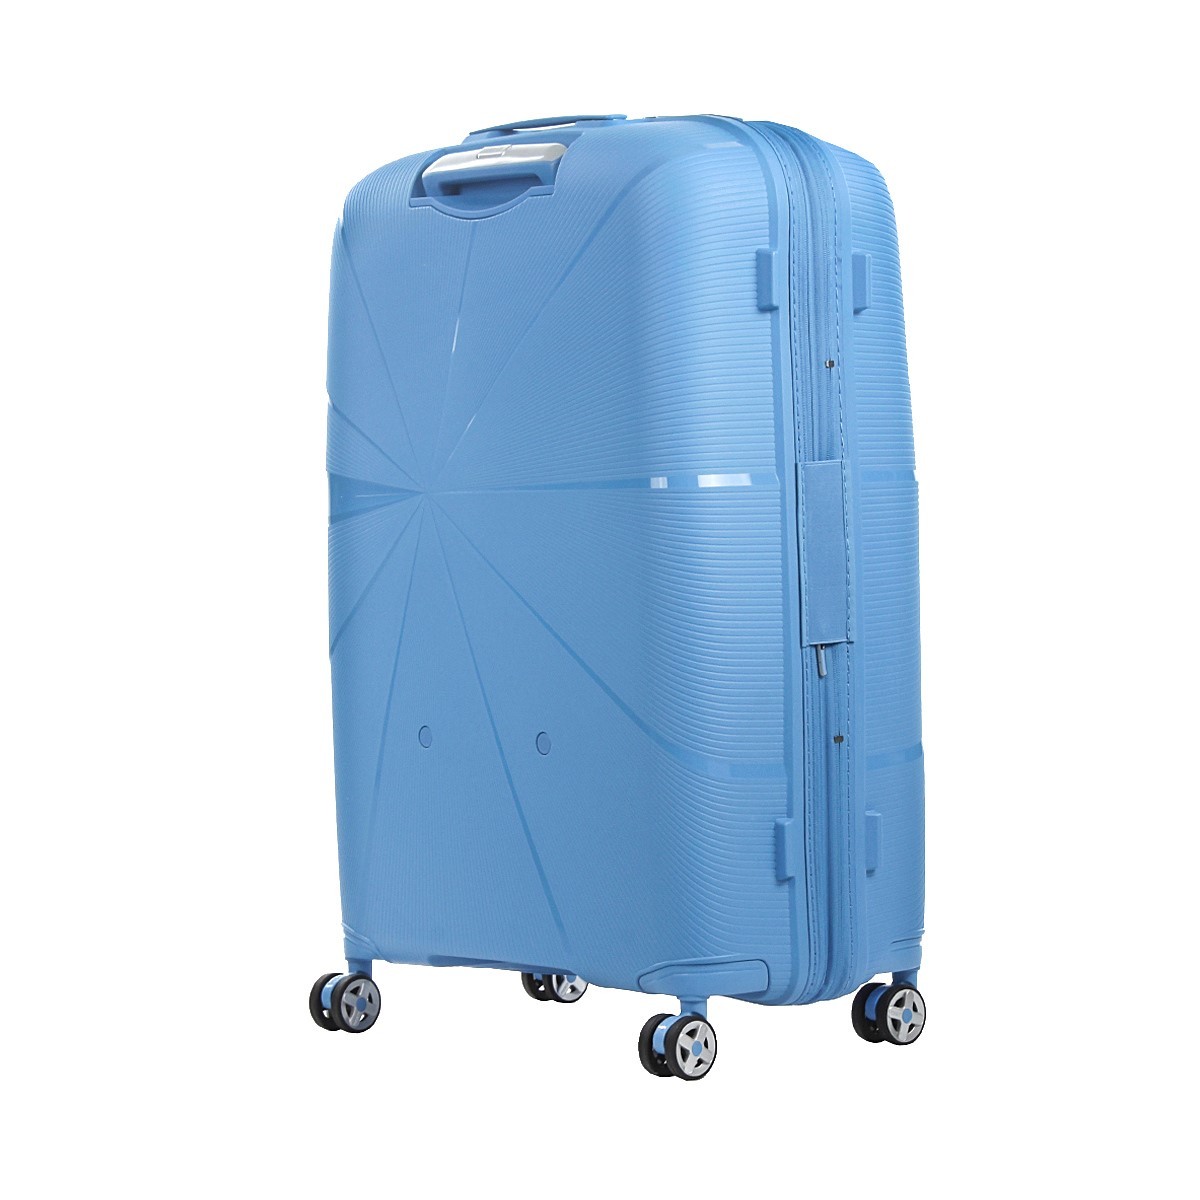 American tourister by samsonite Spinner l 4 ruote Tranquil blue Starvibe MD5*01004